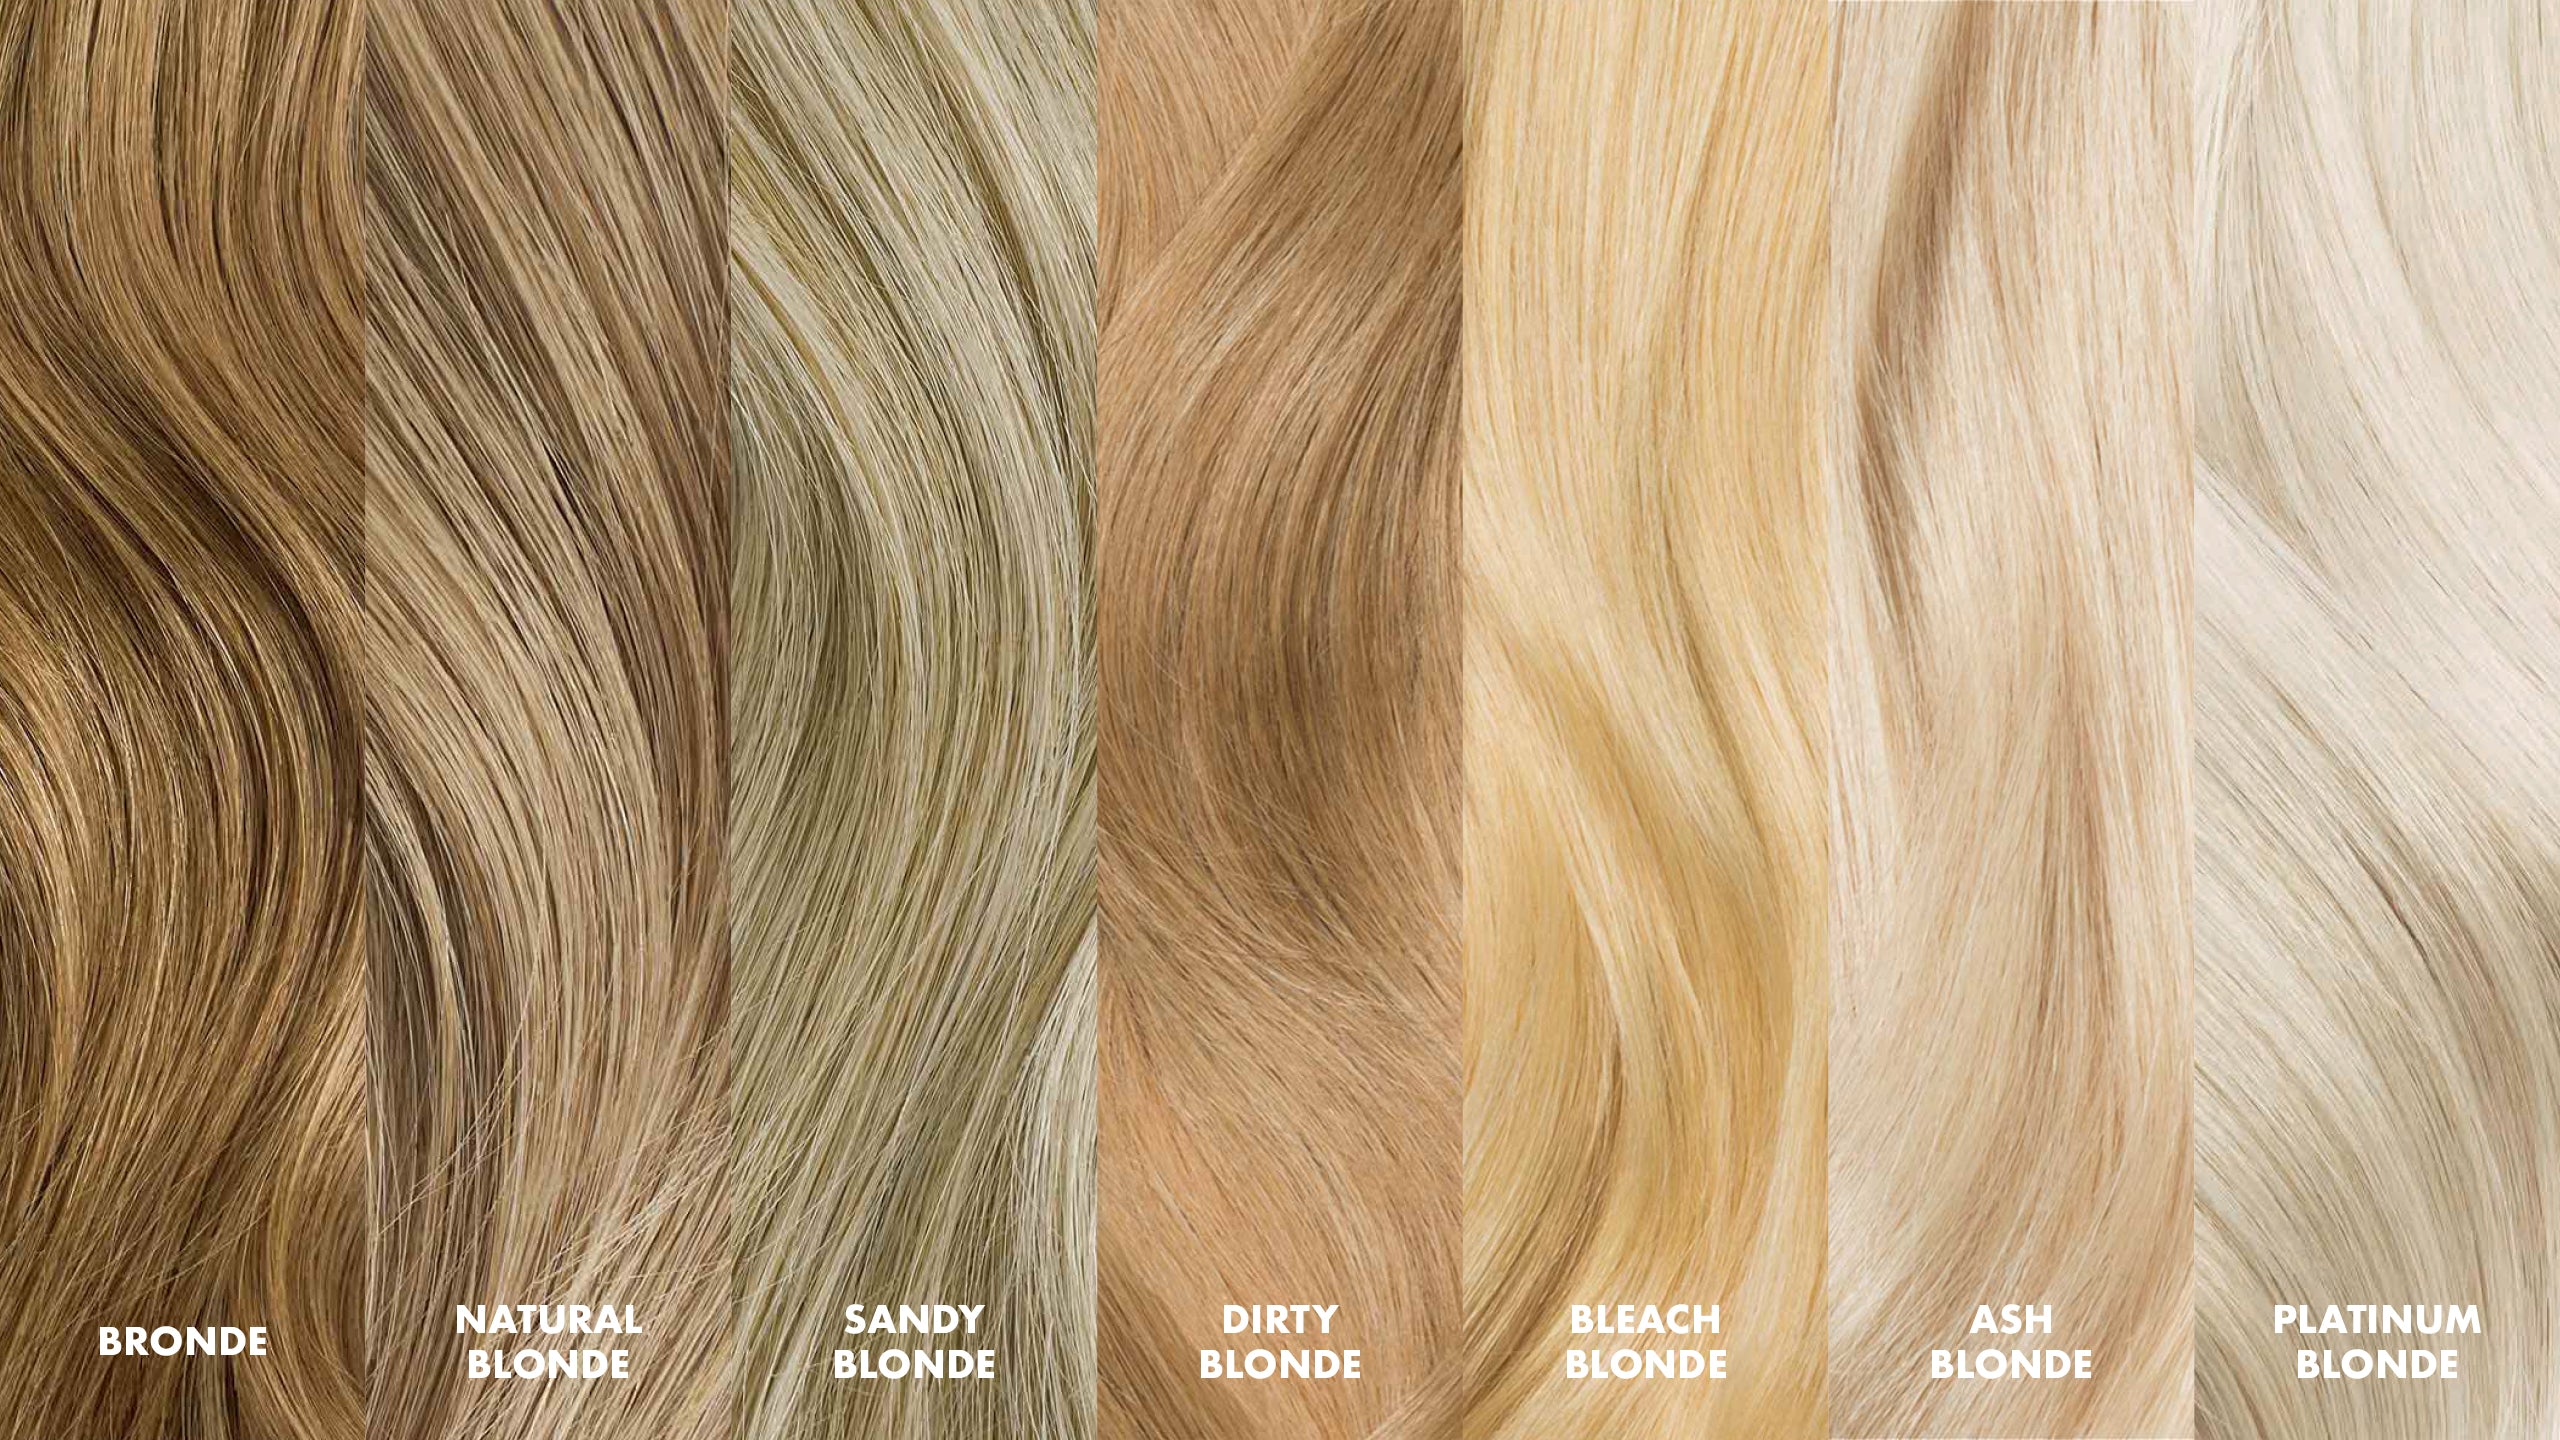 9. Atomic Blonde Hair Color vs. Platinum Blonde: What's the Difference? - wide 10